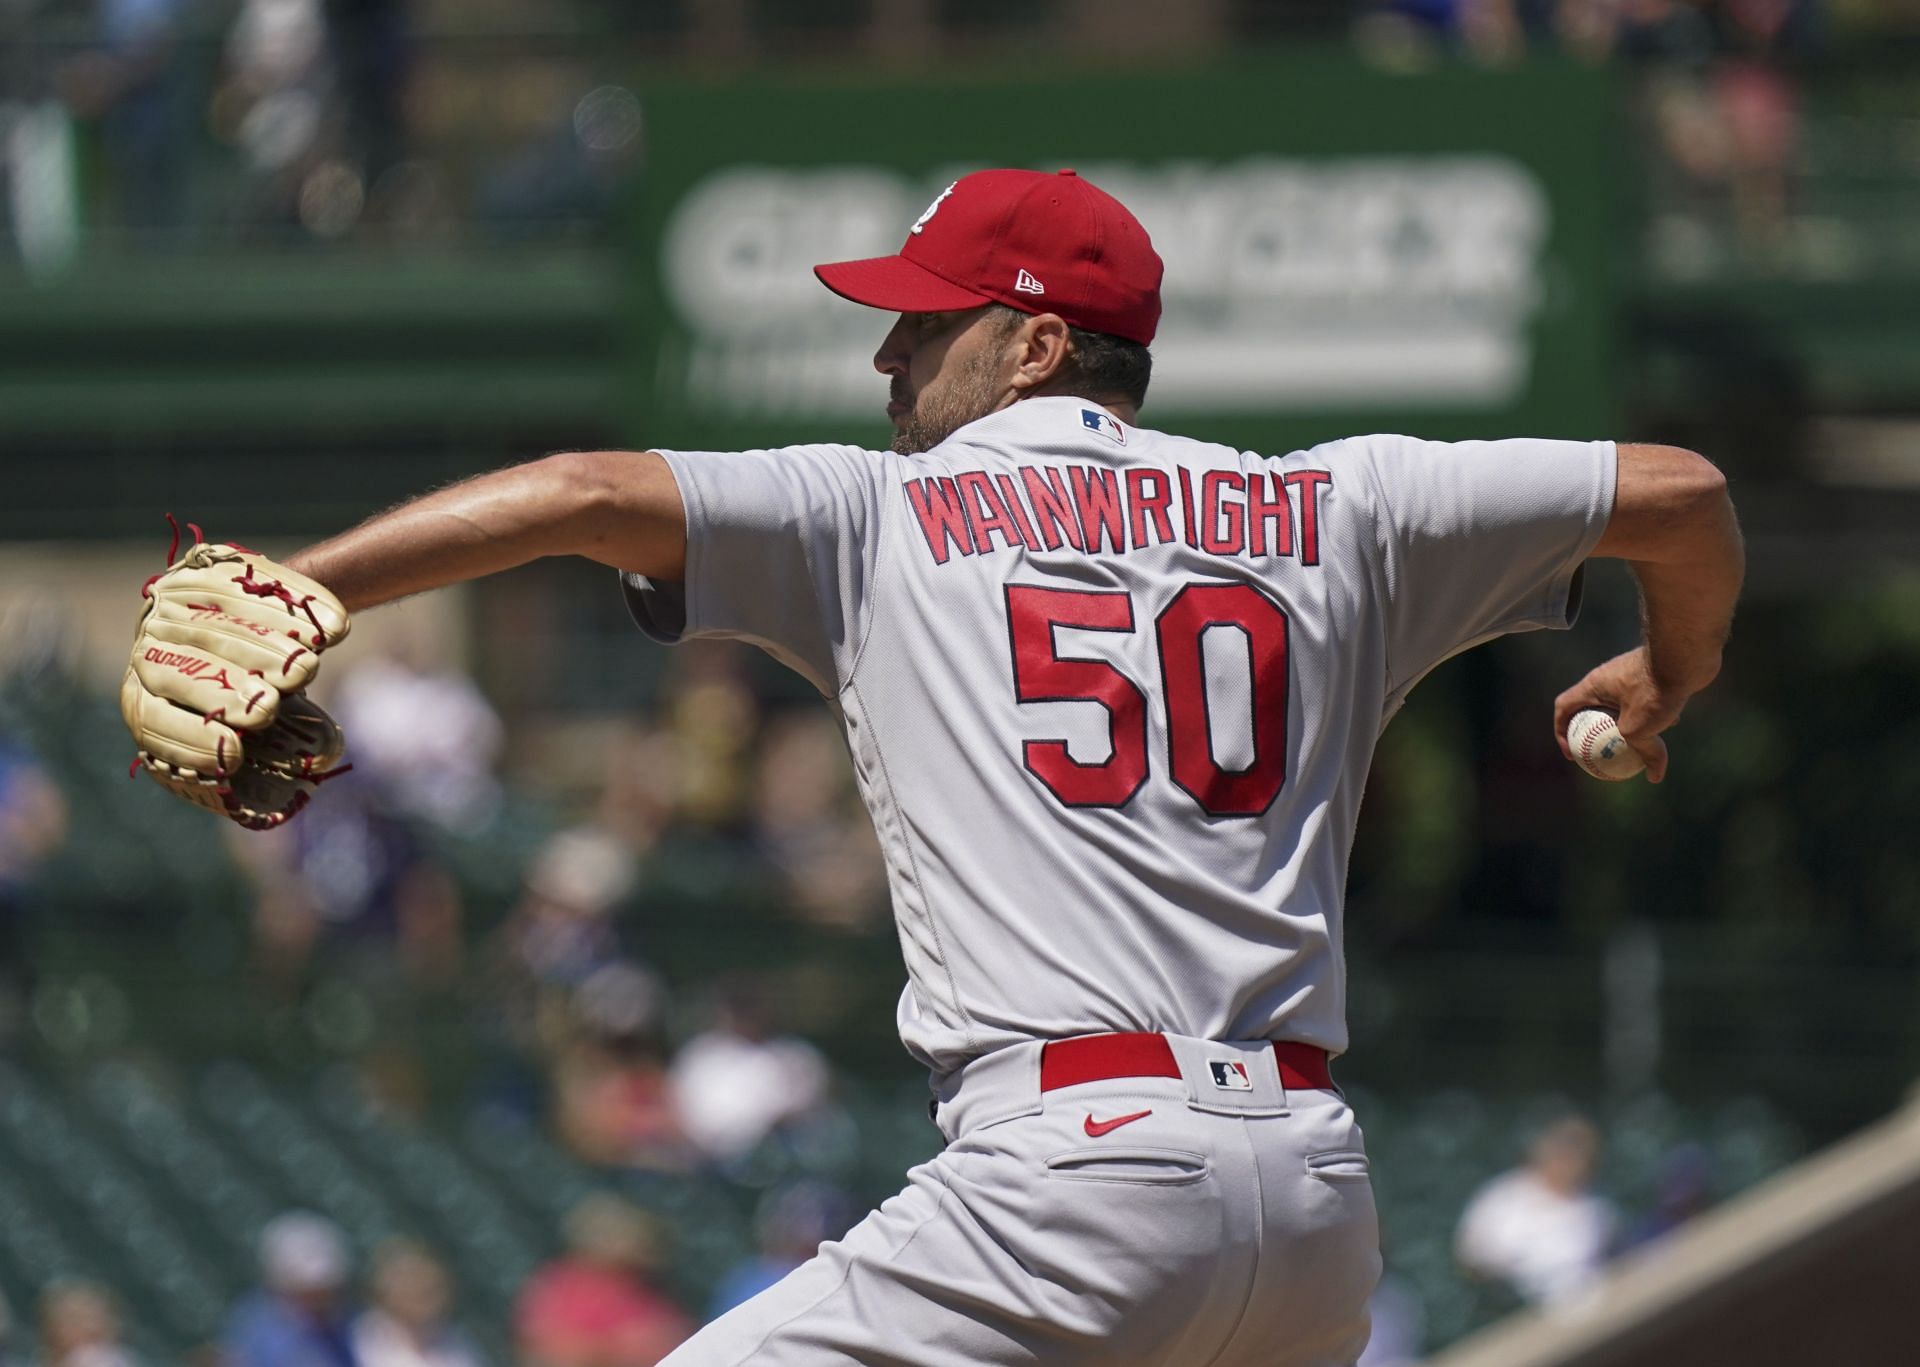 St. Louis Cardinals fans rally around veteran pitcher Adam Wainwright after he provides in-depth reasoning for late-season decline: "We love you Waino, always", "This is what leadership looks like"